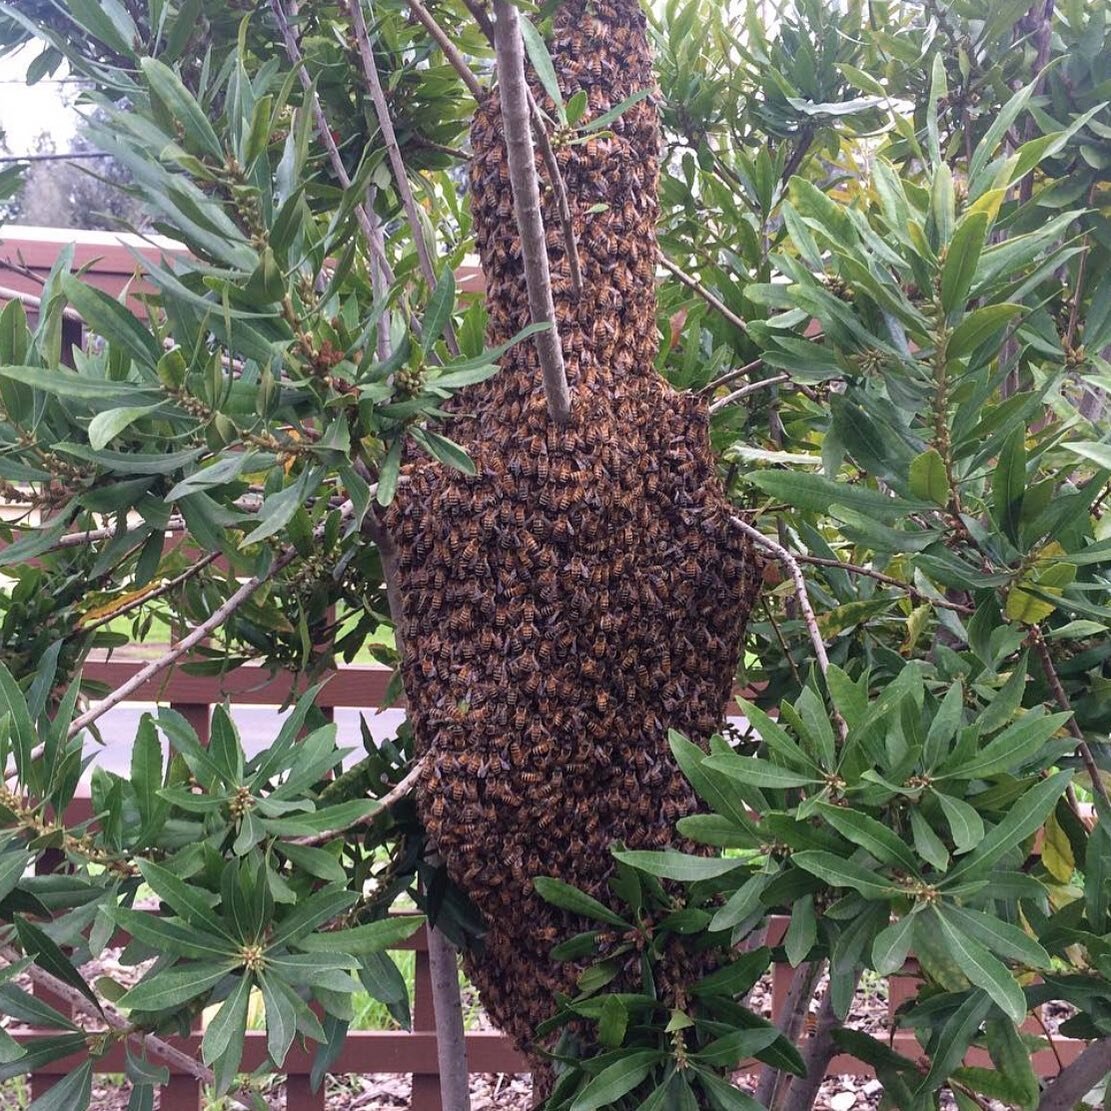 Woohoo! It's swarm season! Check out the new blog post to learn more about honey bee swarms 🐝
.
.
.
www.northernrootsbeeco.com/blog/honey-bee-swarms